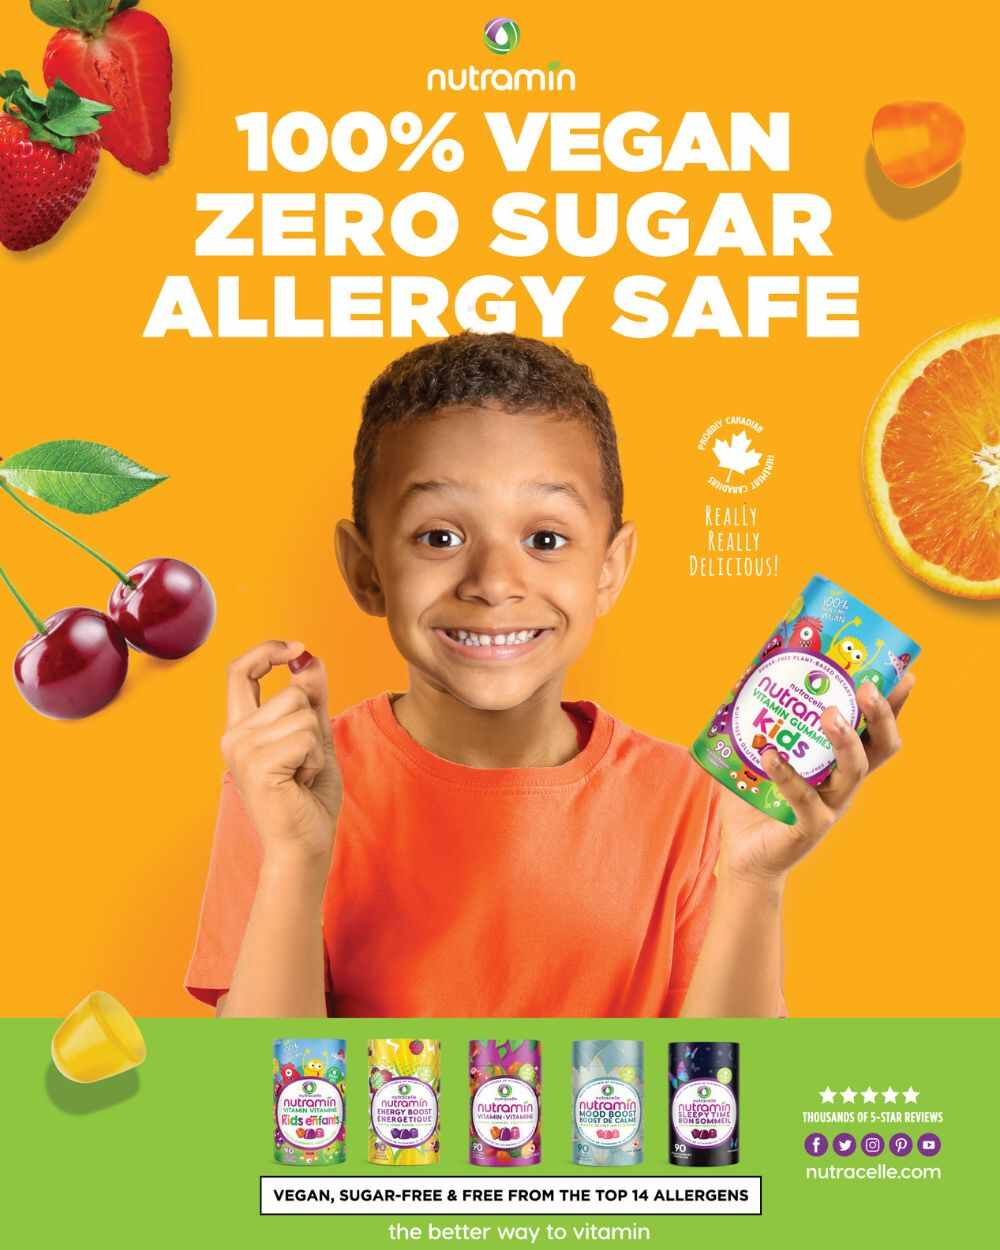 a happy kid is holding a bottle of nutramin vitamin gummies in front of a colorful background stating 100% vegan, zero sugar, allergy safe